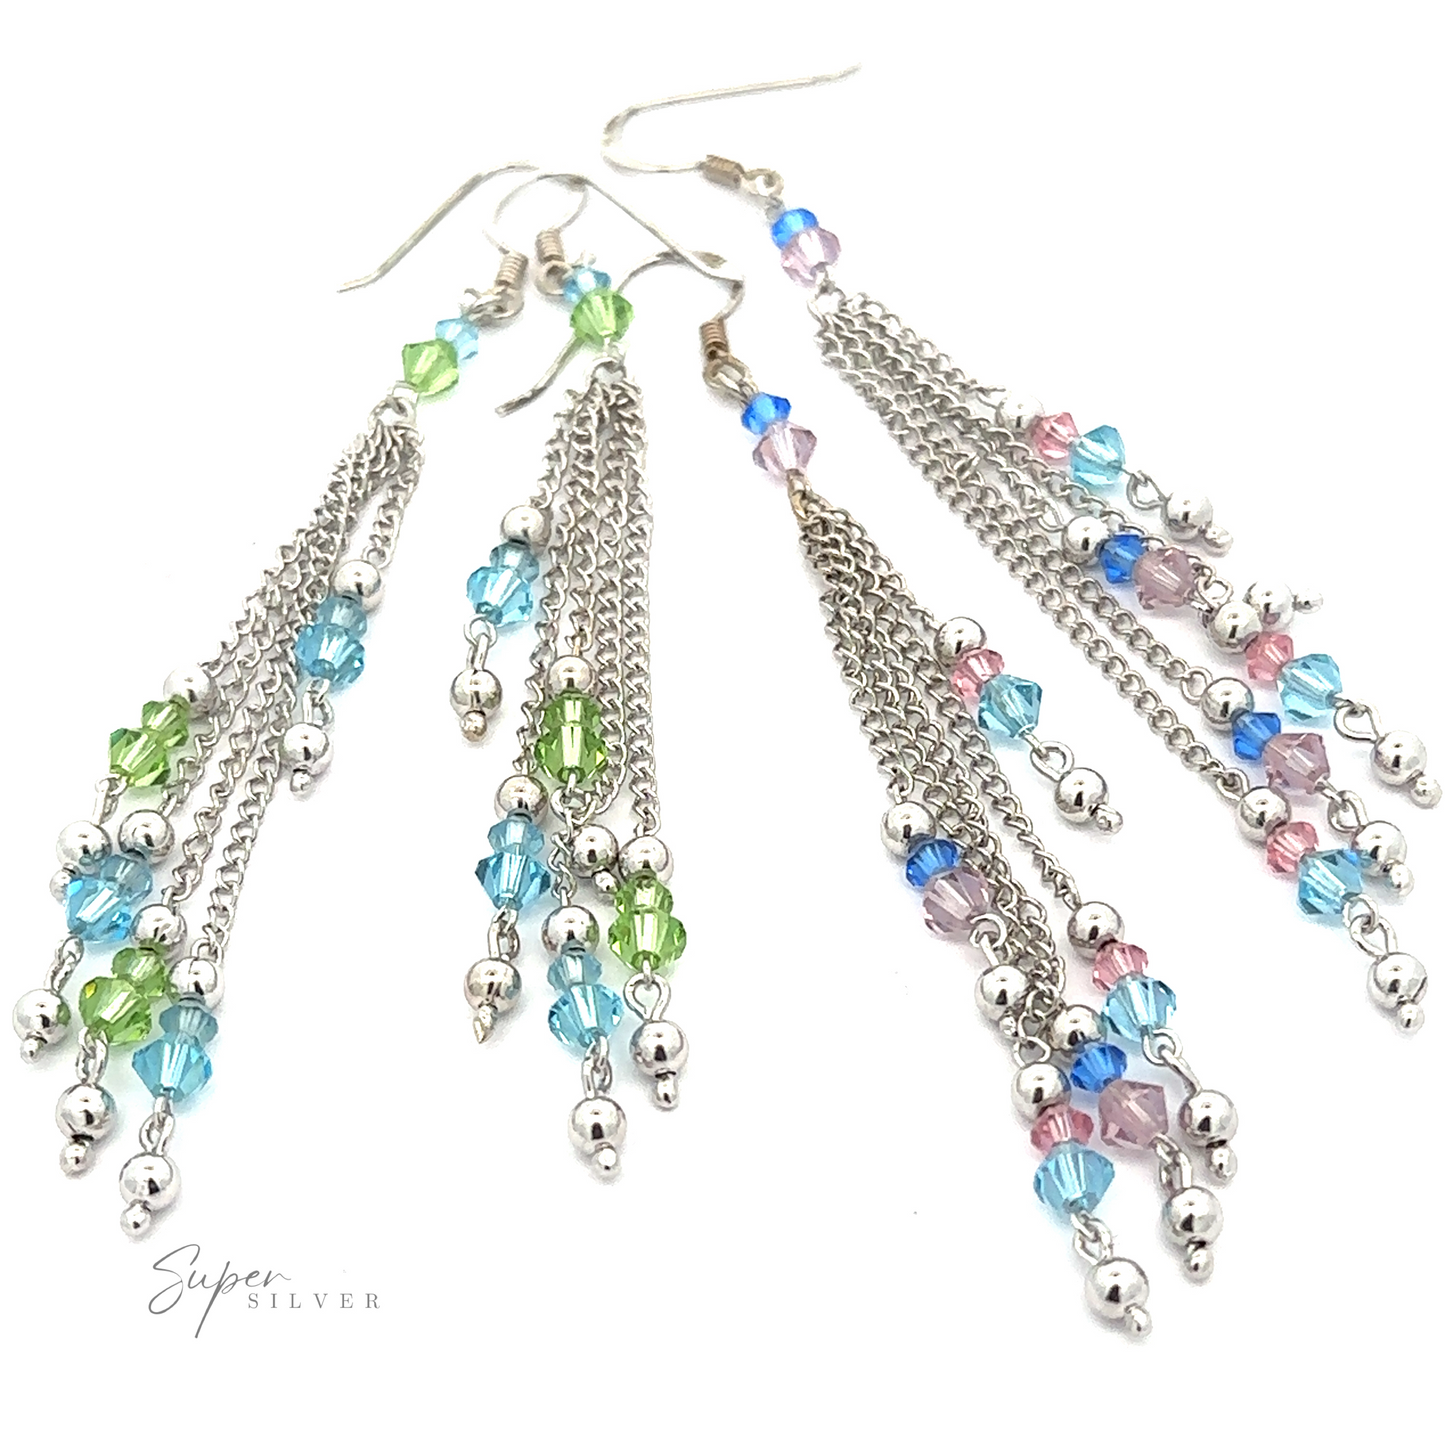 A set of elegant, rhodium-plated Layered Earrings with Multicolored Beads featuring clusters of blue, green, pink, and purple multicolored beads hanging from them, displayed against a pristine white background.